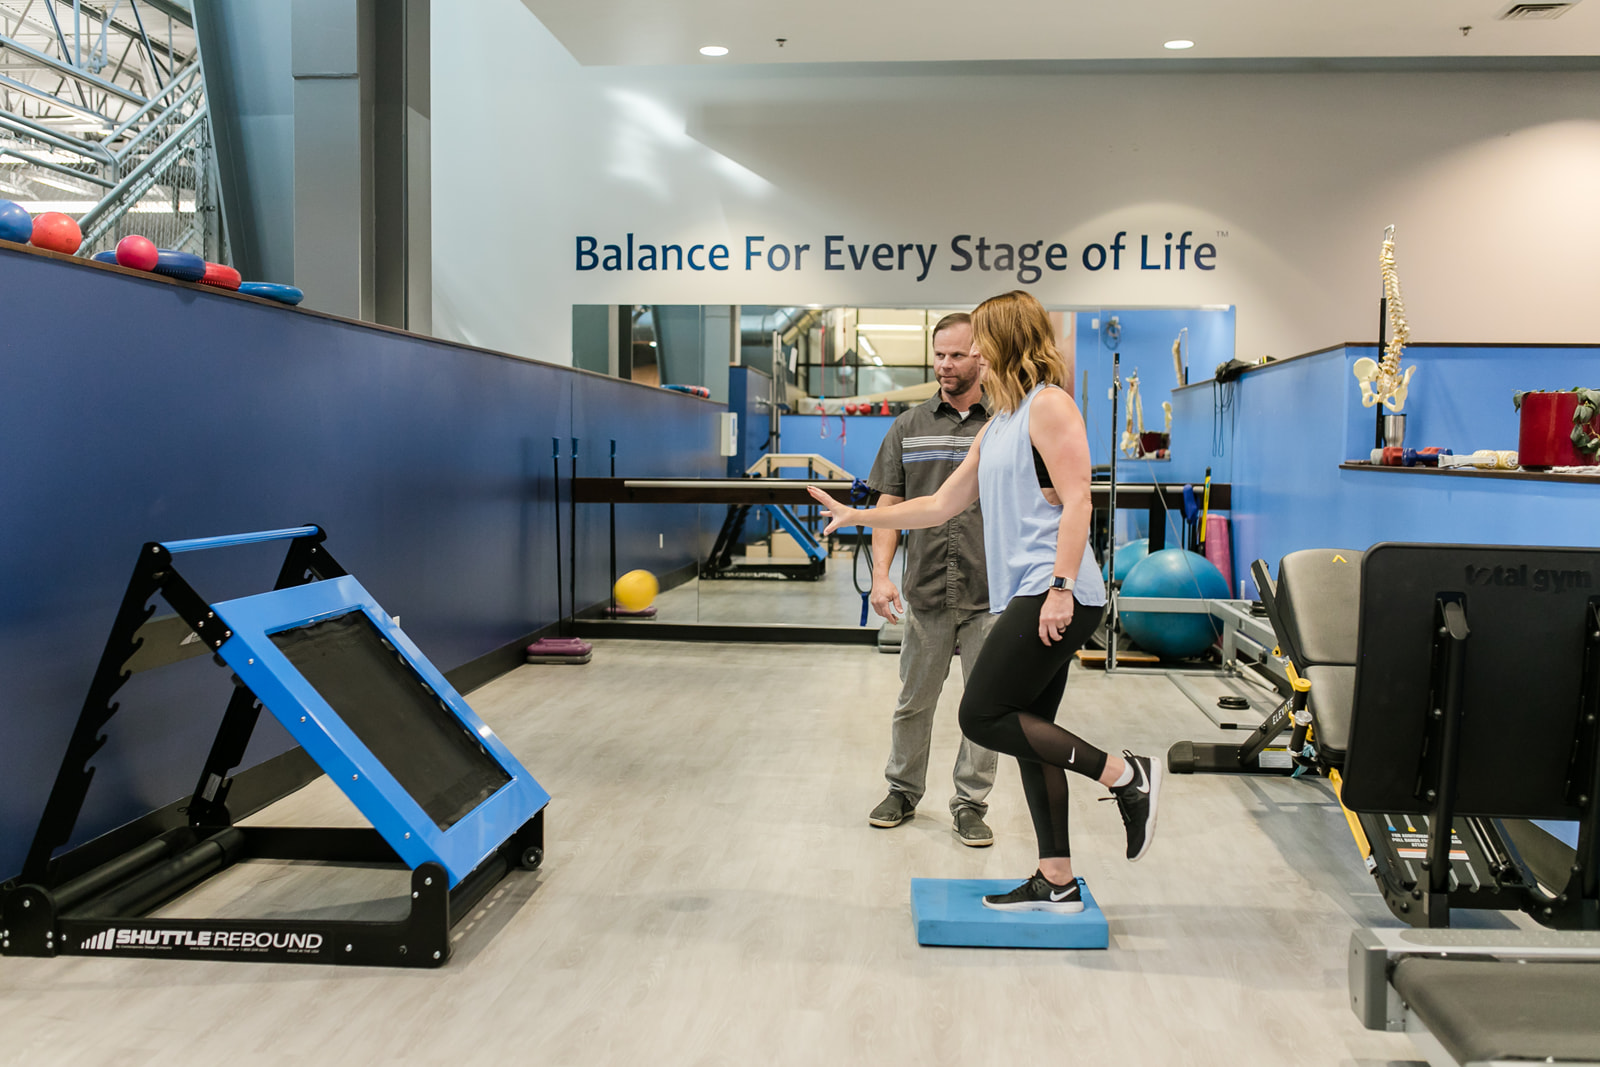 Fitness Health And Wellness Fyzical Therapy And Balance Centers